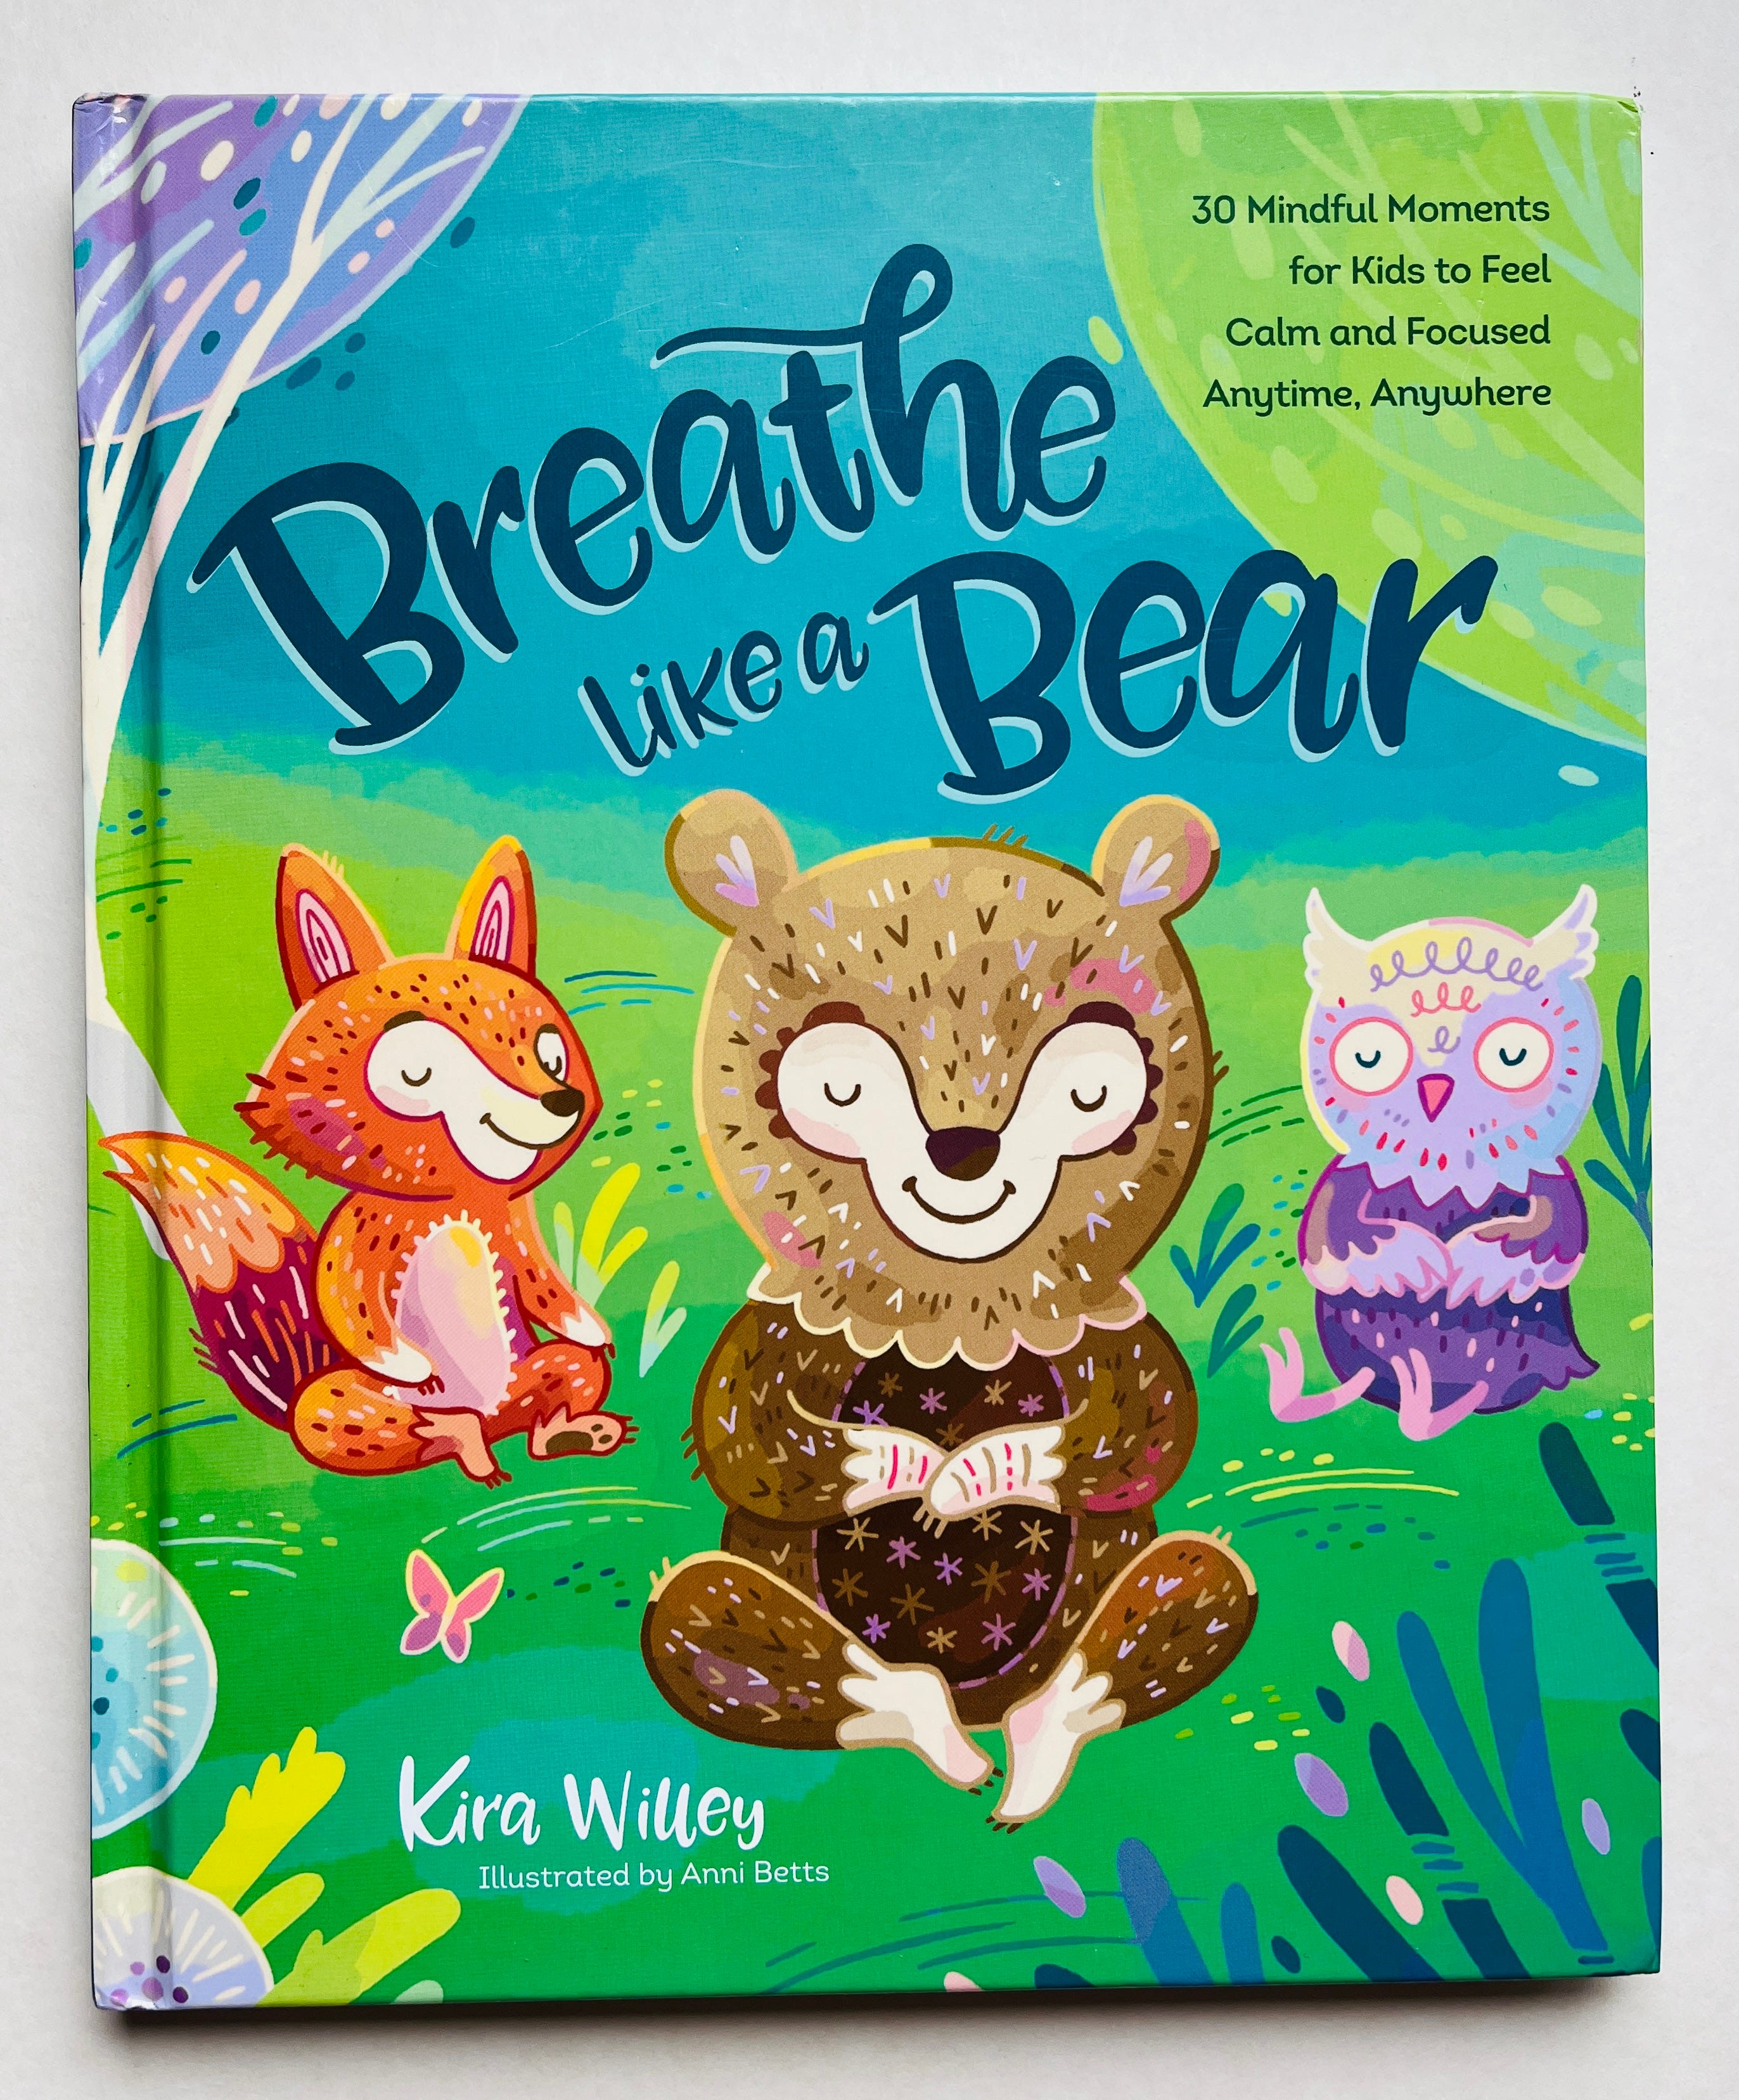 20 Incredible Mindfulness Books for Kids